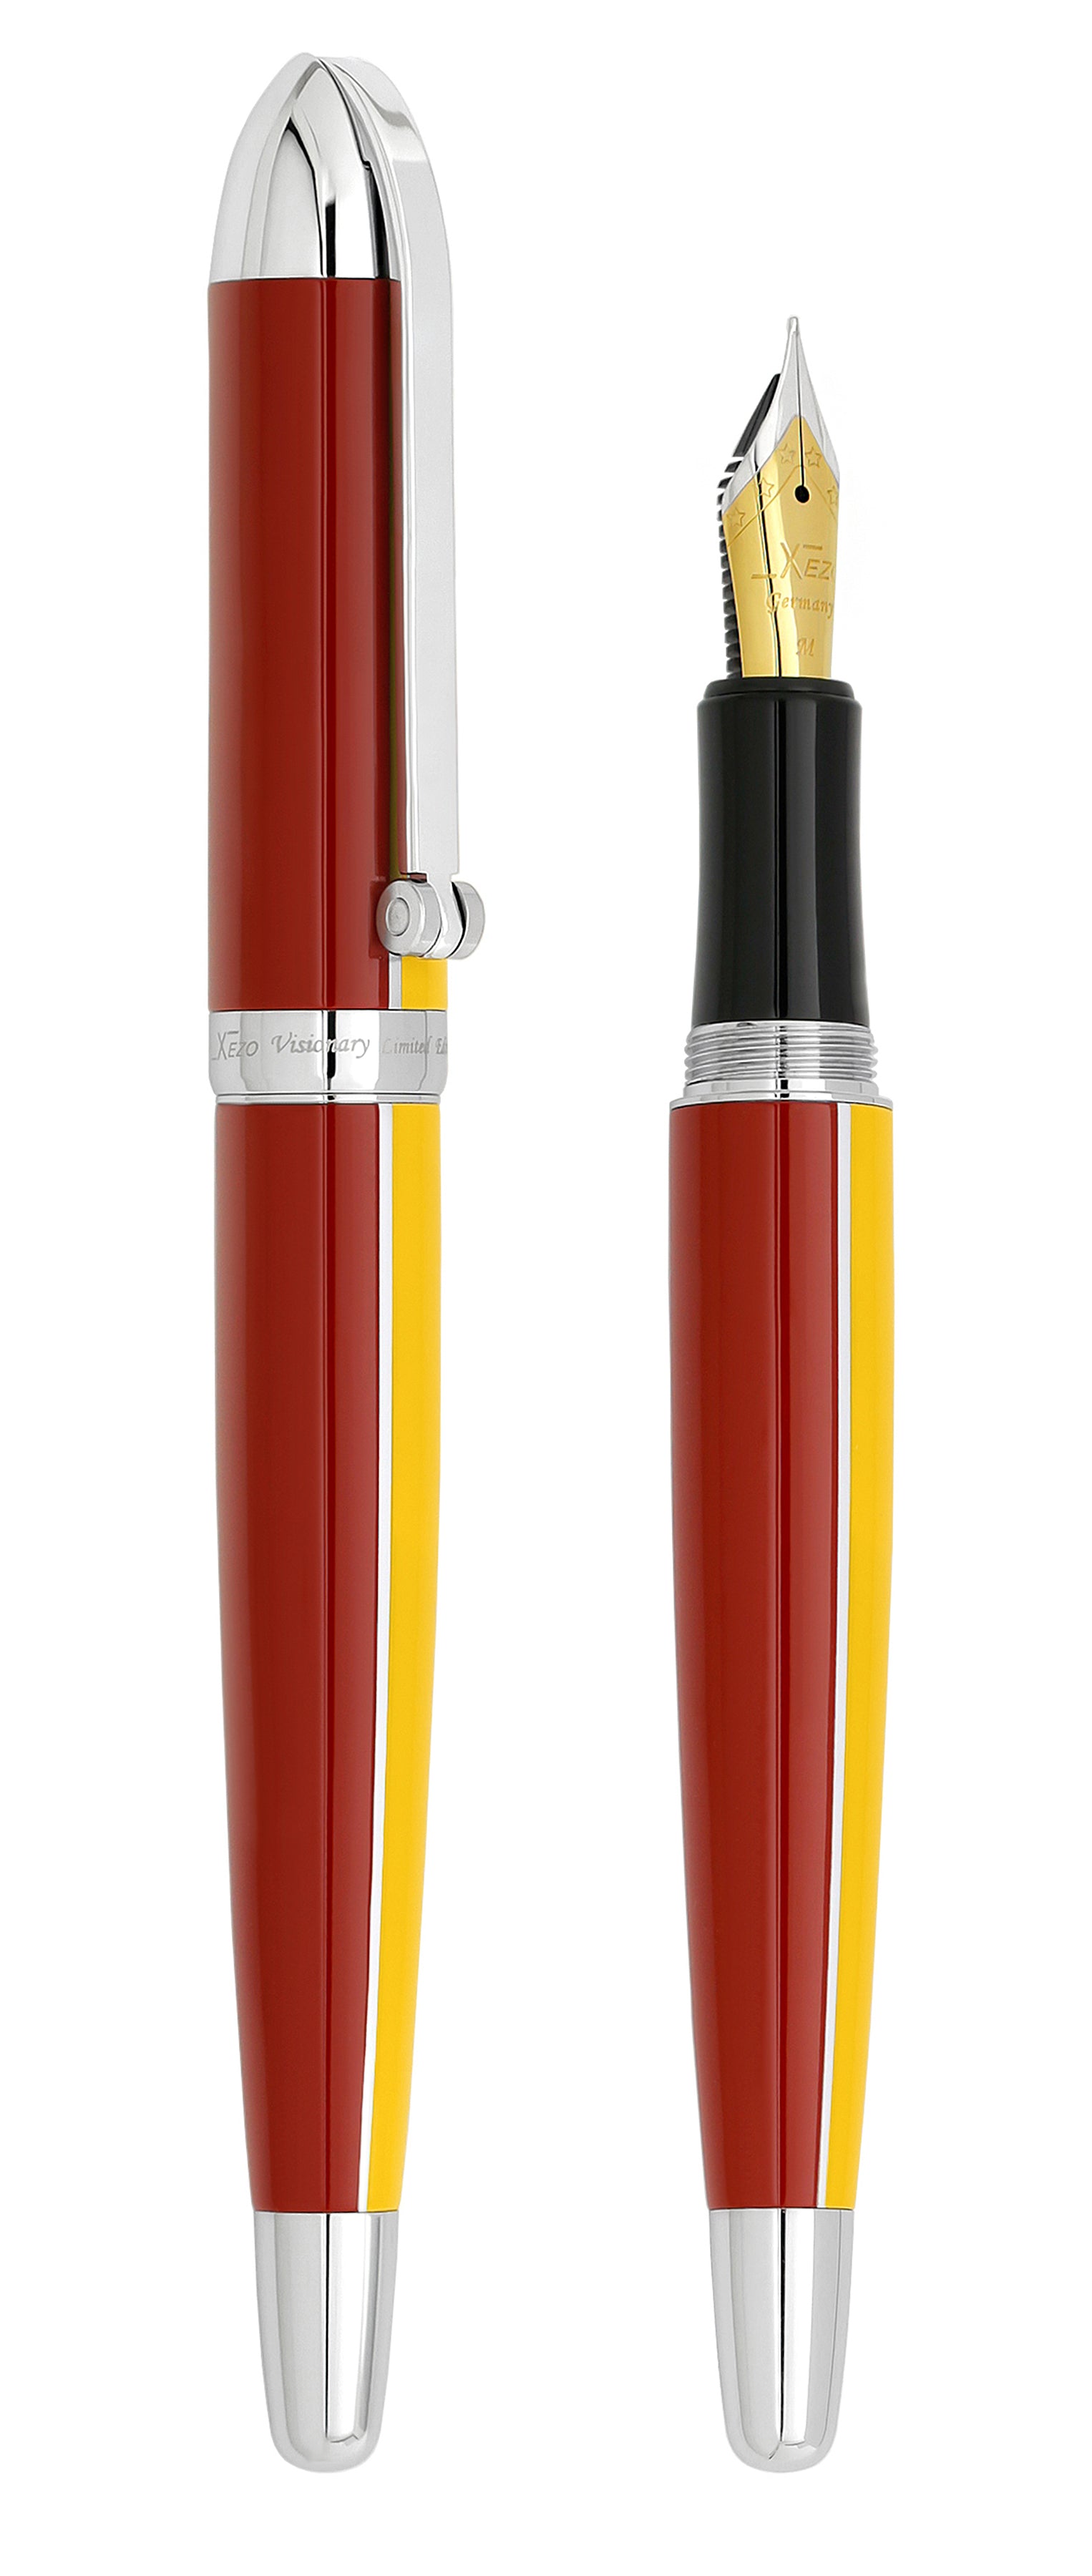 Xezo - Comparison between 3/4 view of capped and uncapped Visionary Aspen/Red FM fountain pens